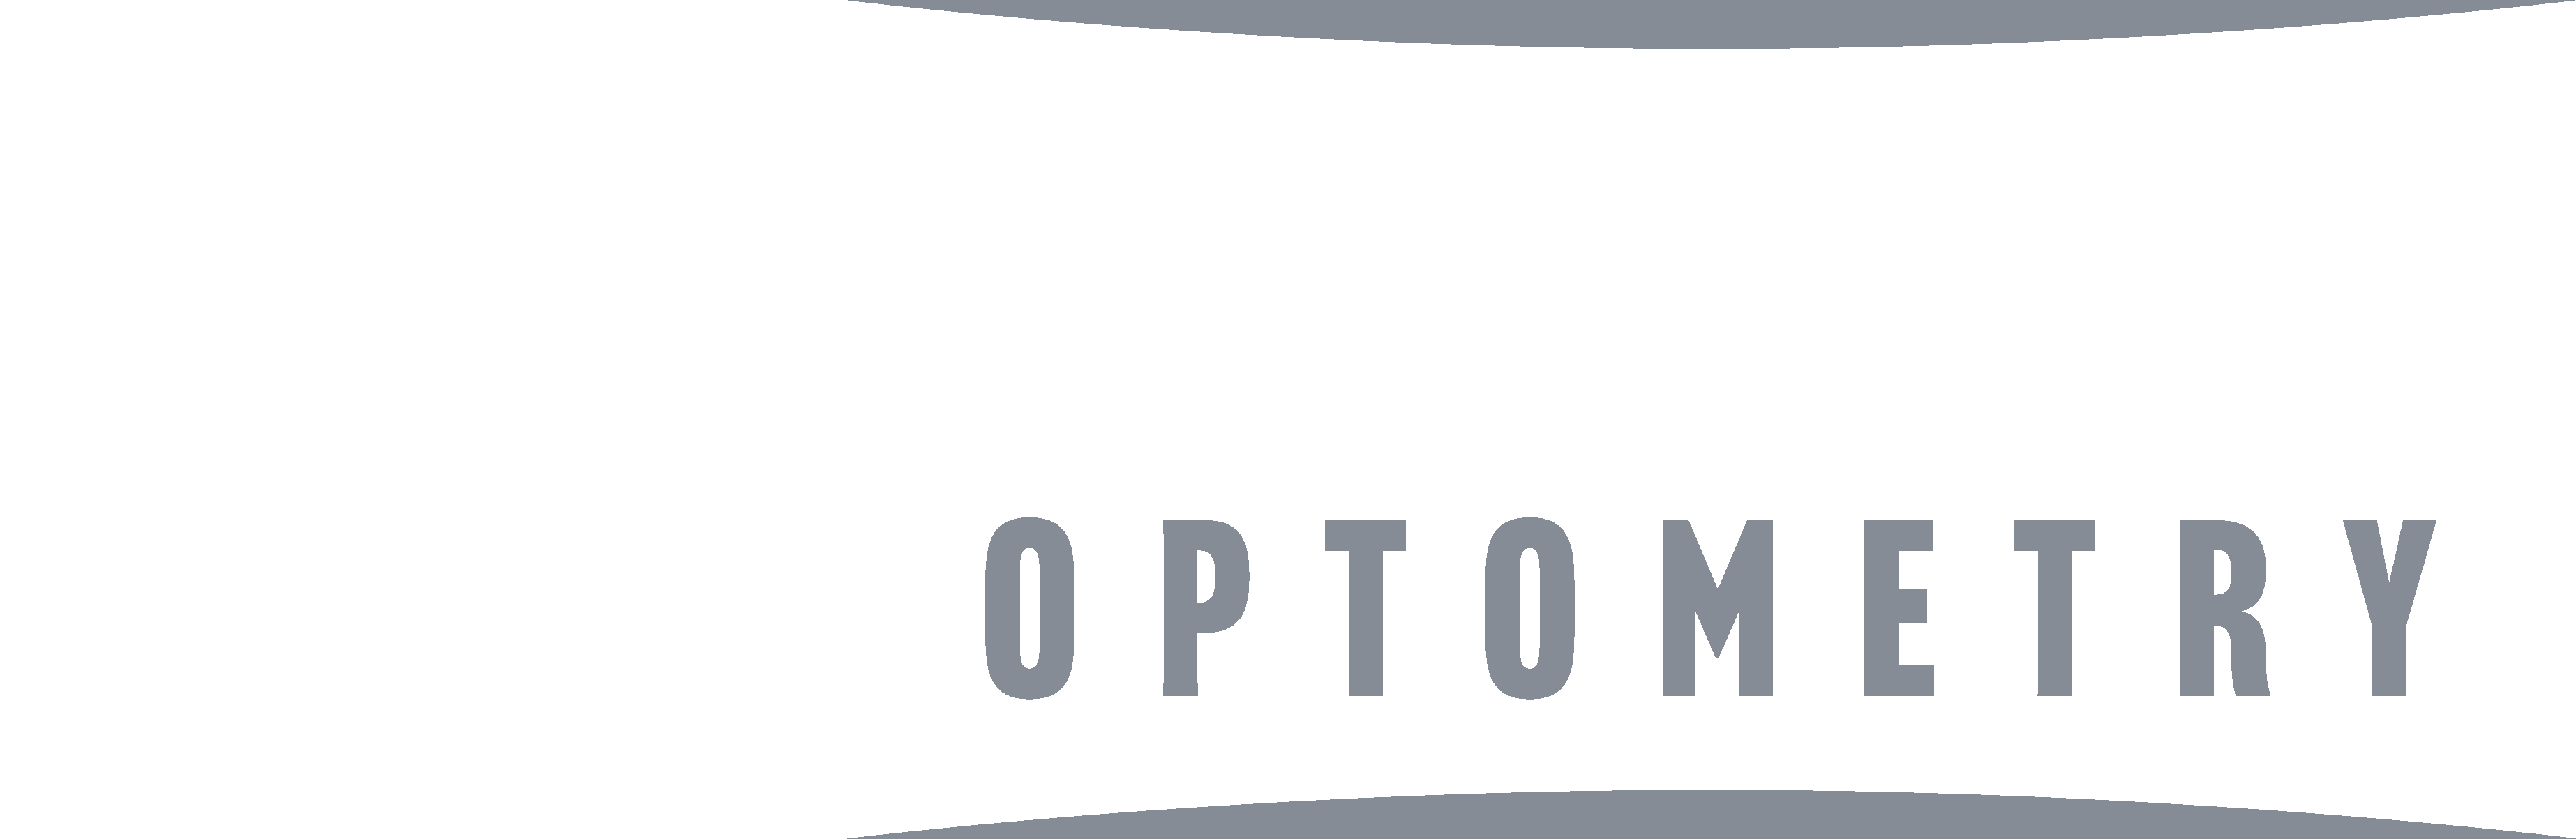 Before & After – Sullivan Optometry